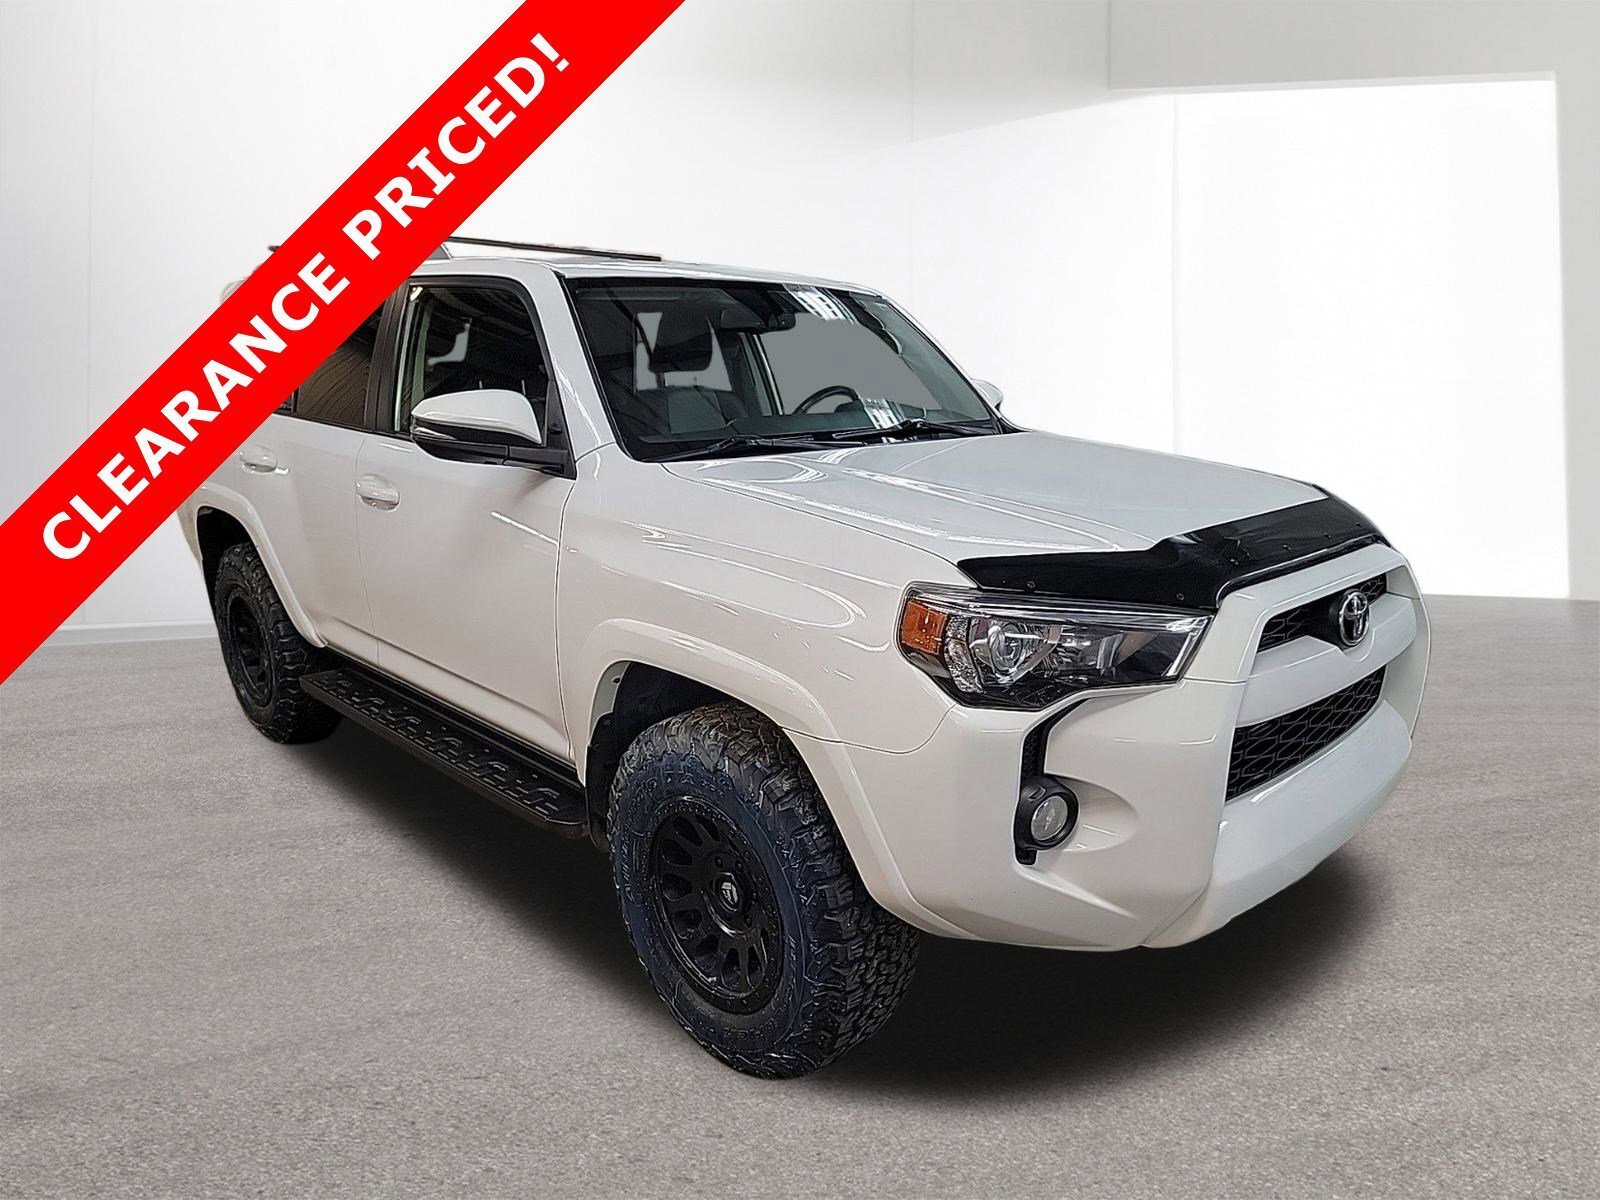 2016 Toyota 4Runner SR5 FRESH TRADE WITH NO ACCIDENTS